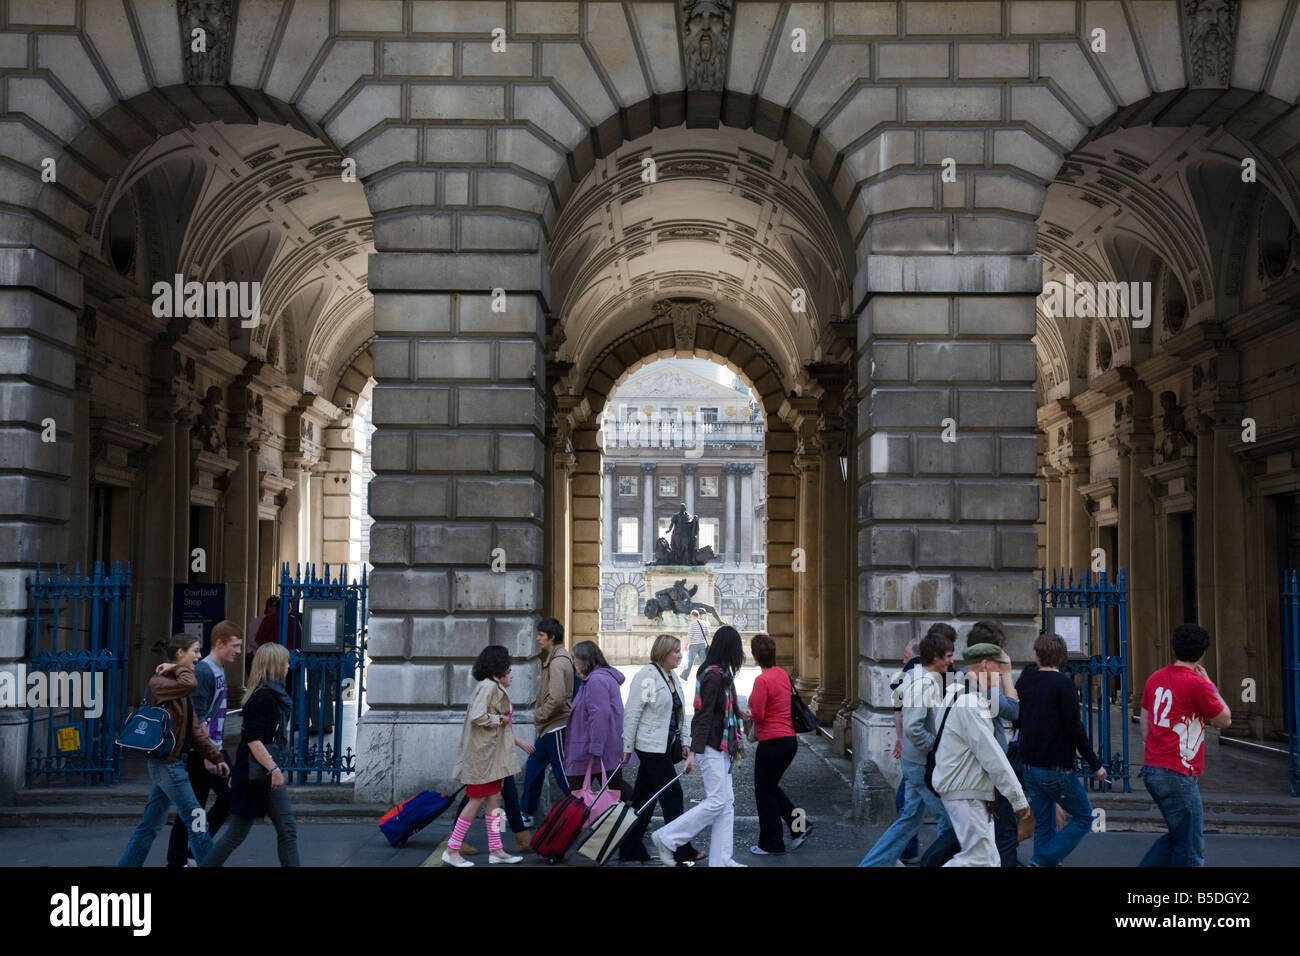 Somerset House London and tourists walking in front of main entrance arches Stock Photo